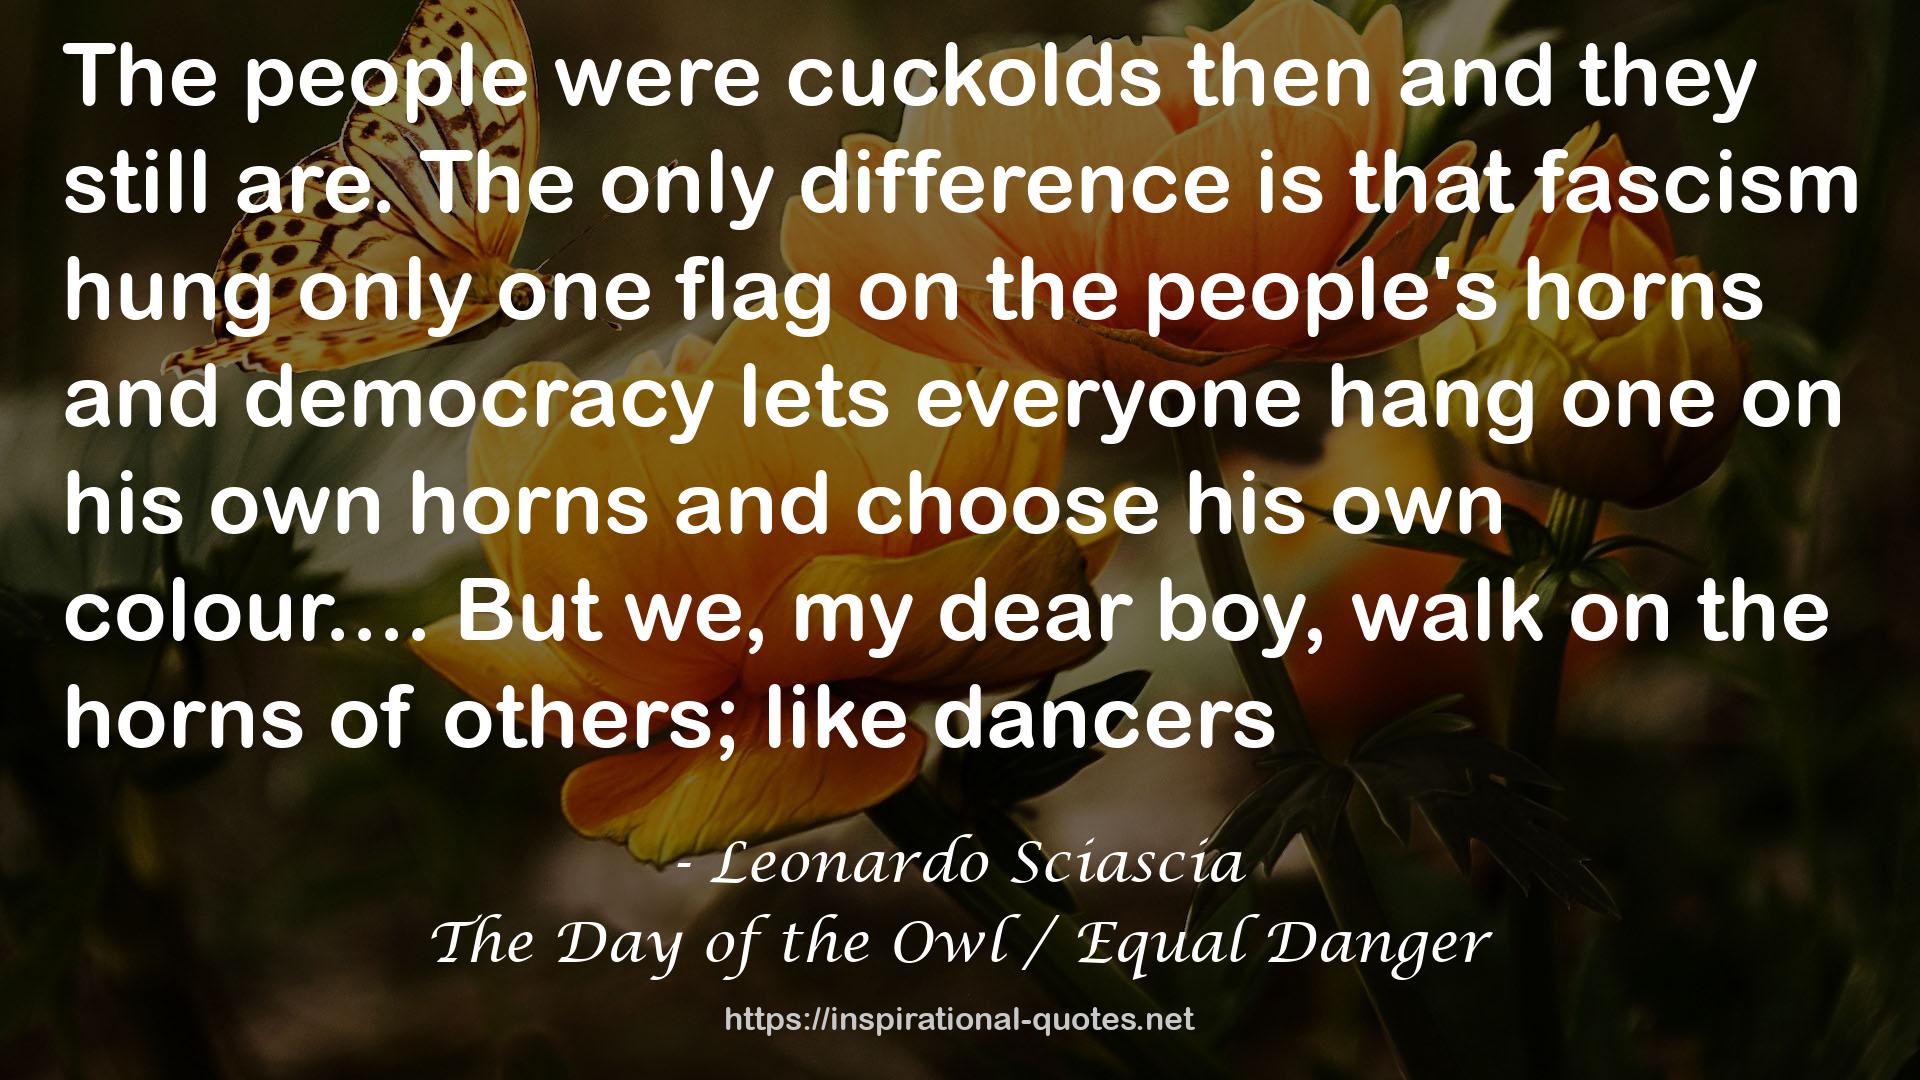 The Day of the Owl / Equal Danger QUOTES